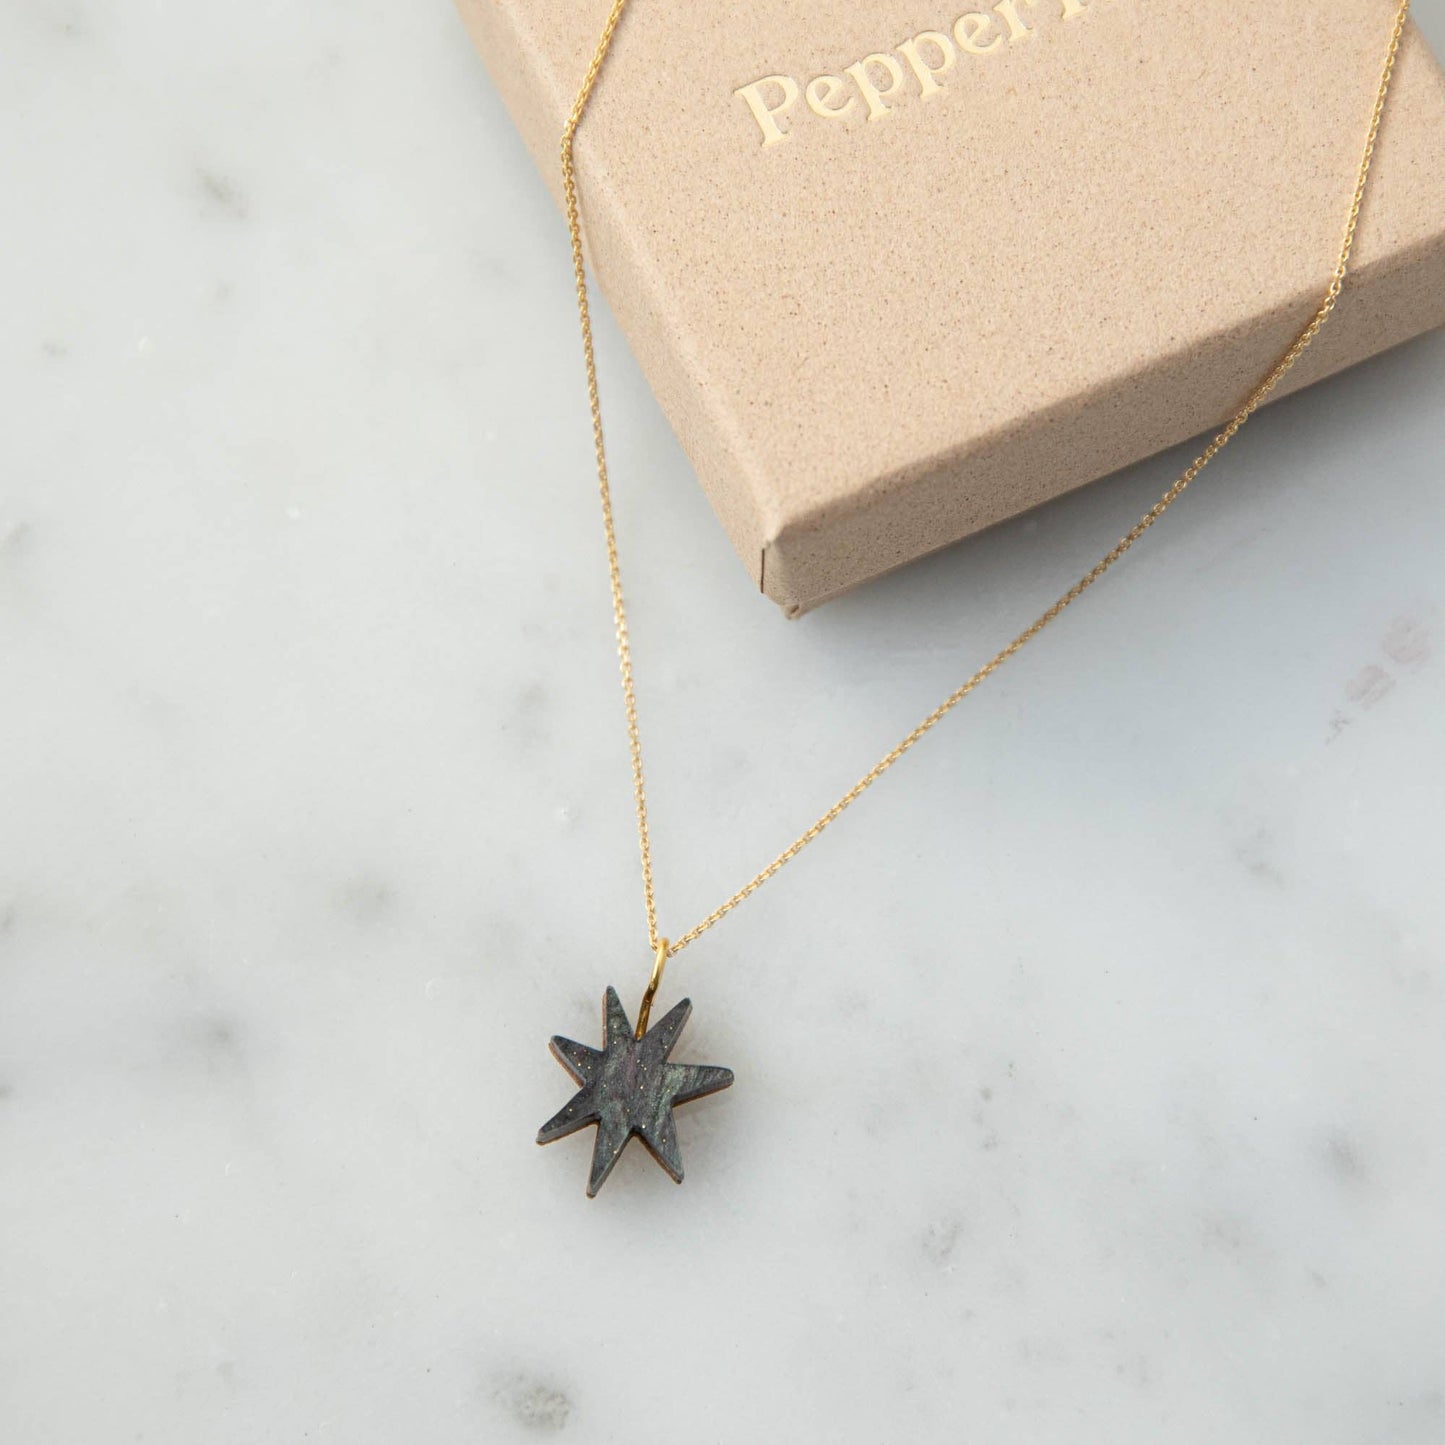 Pepper You Hand Drawn Star Gold Necklace in Smoke Black Sparkle: Marble Teal Sparkle